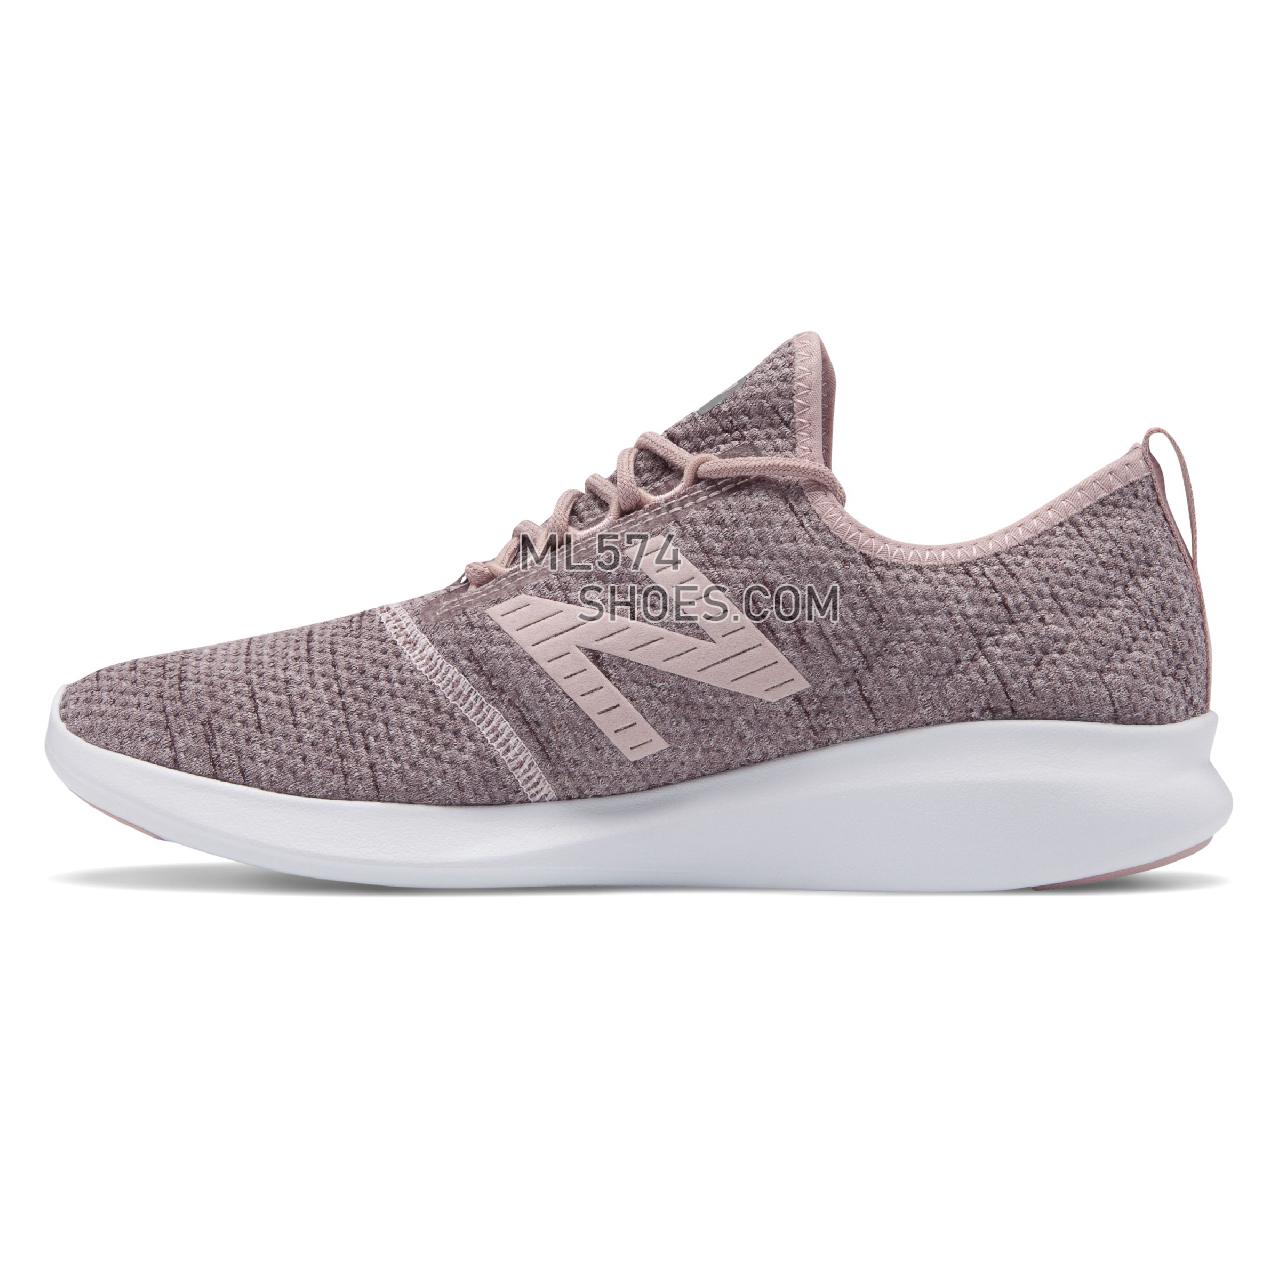 New Balance FuelCore Coast v4 Hoodie - Women's 4 - Running Conch Shell with Himalayan Pink - WCSTLRH4